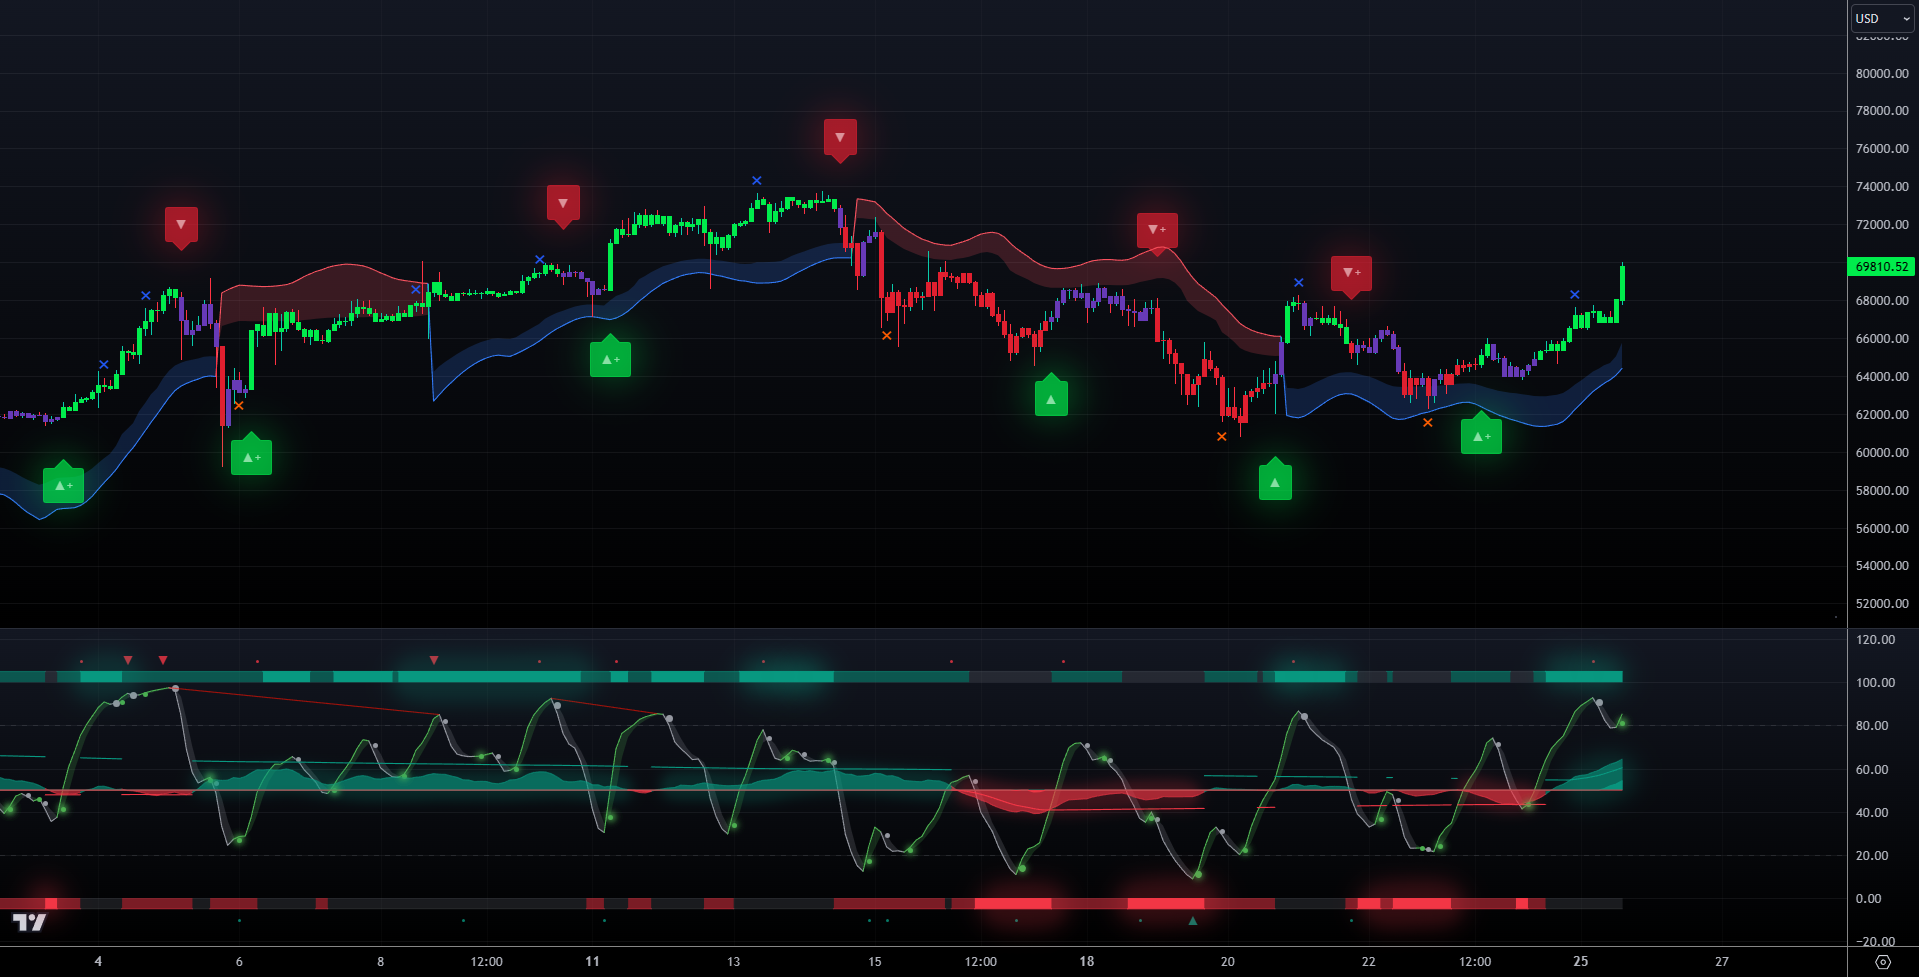 LuxAlgo trading chart showing toolkits, signals, screeners, and backtesting. Image 4